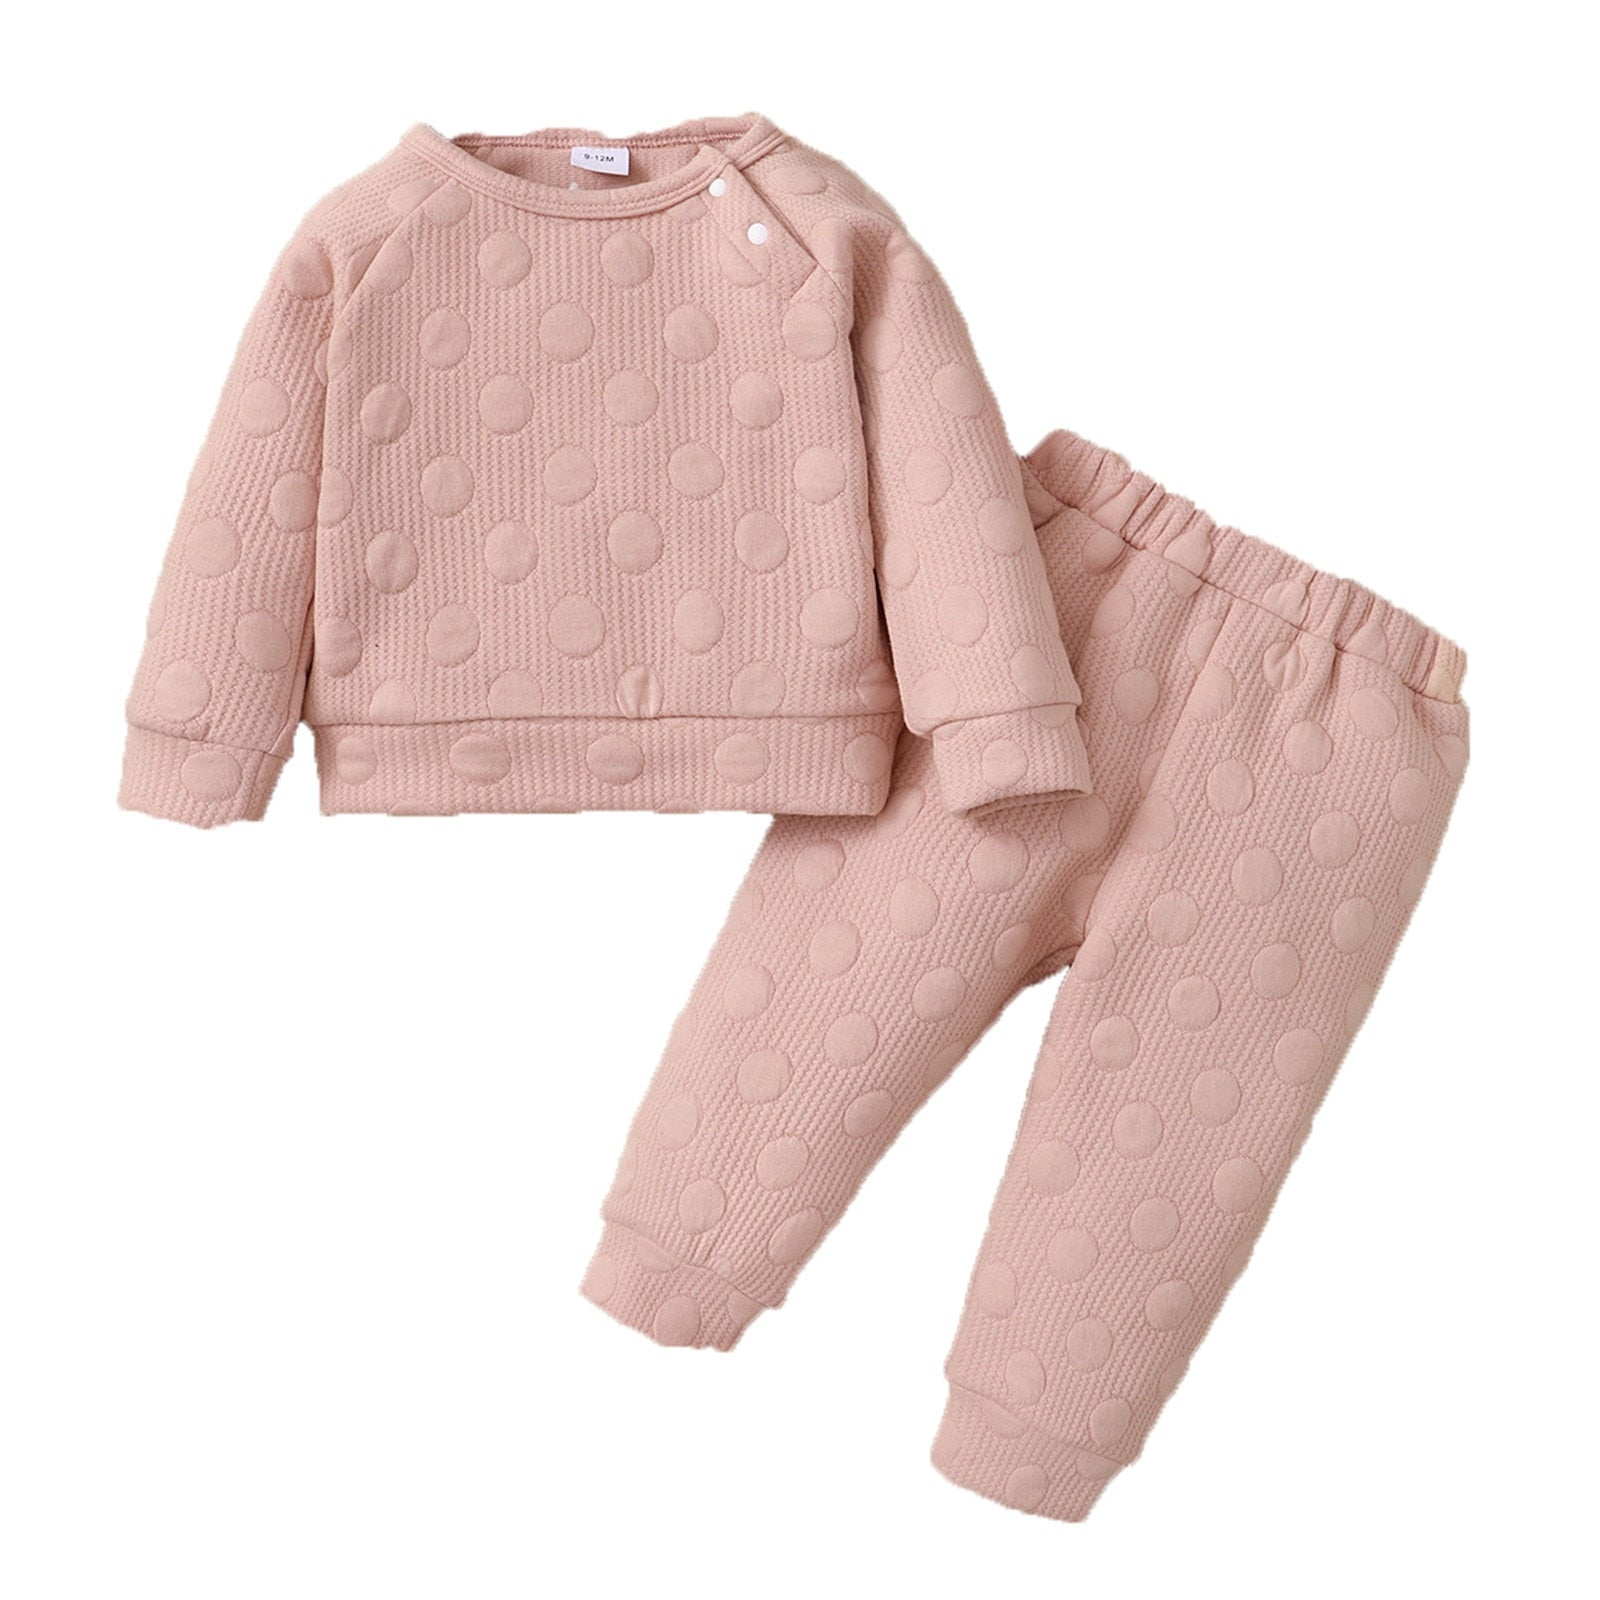 Baby Girls/Boys Set for Newborn Winter Long Sleeve Solid warm 2pc outfit